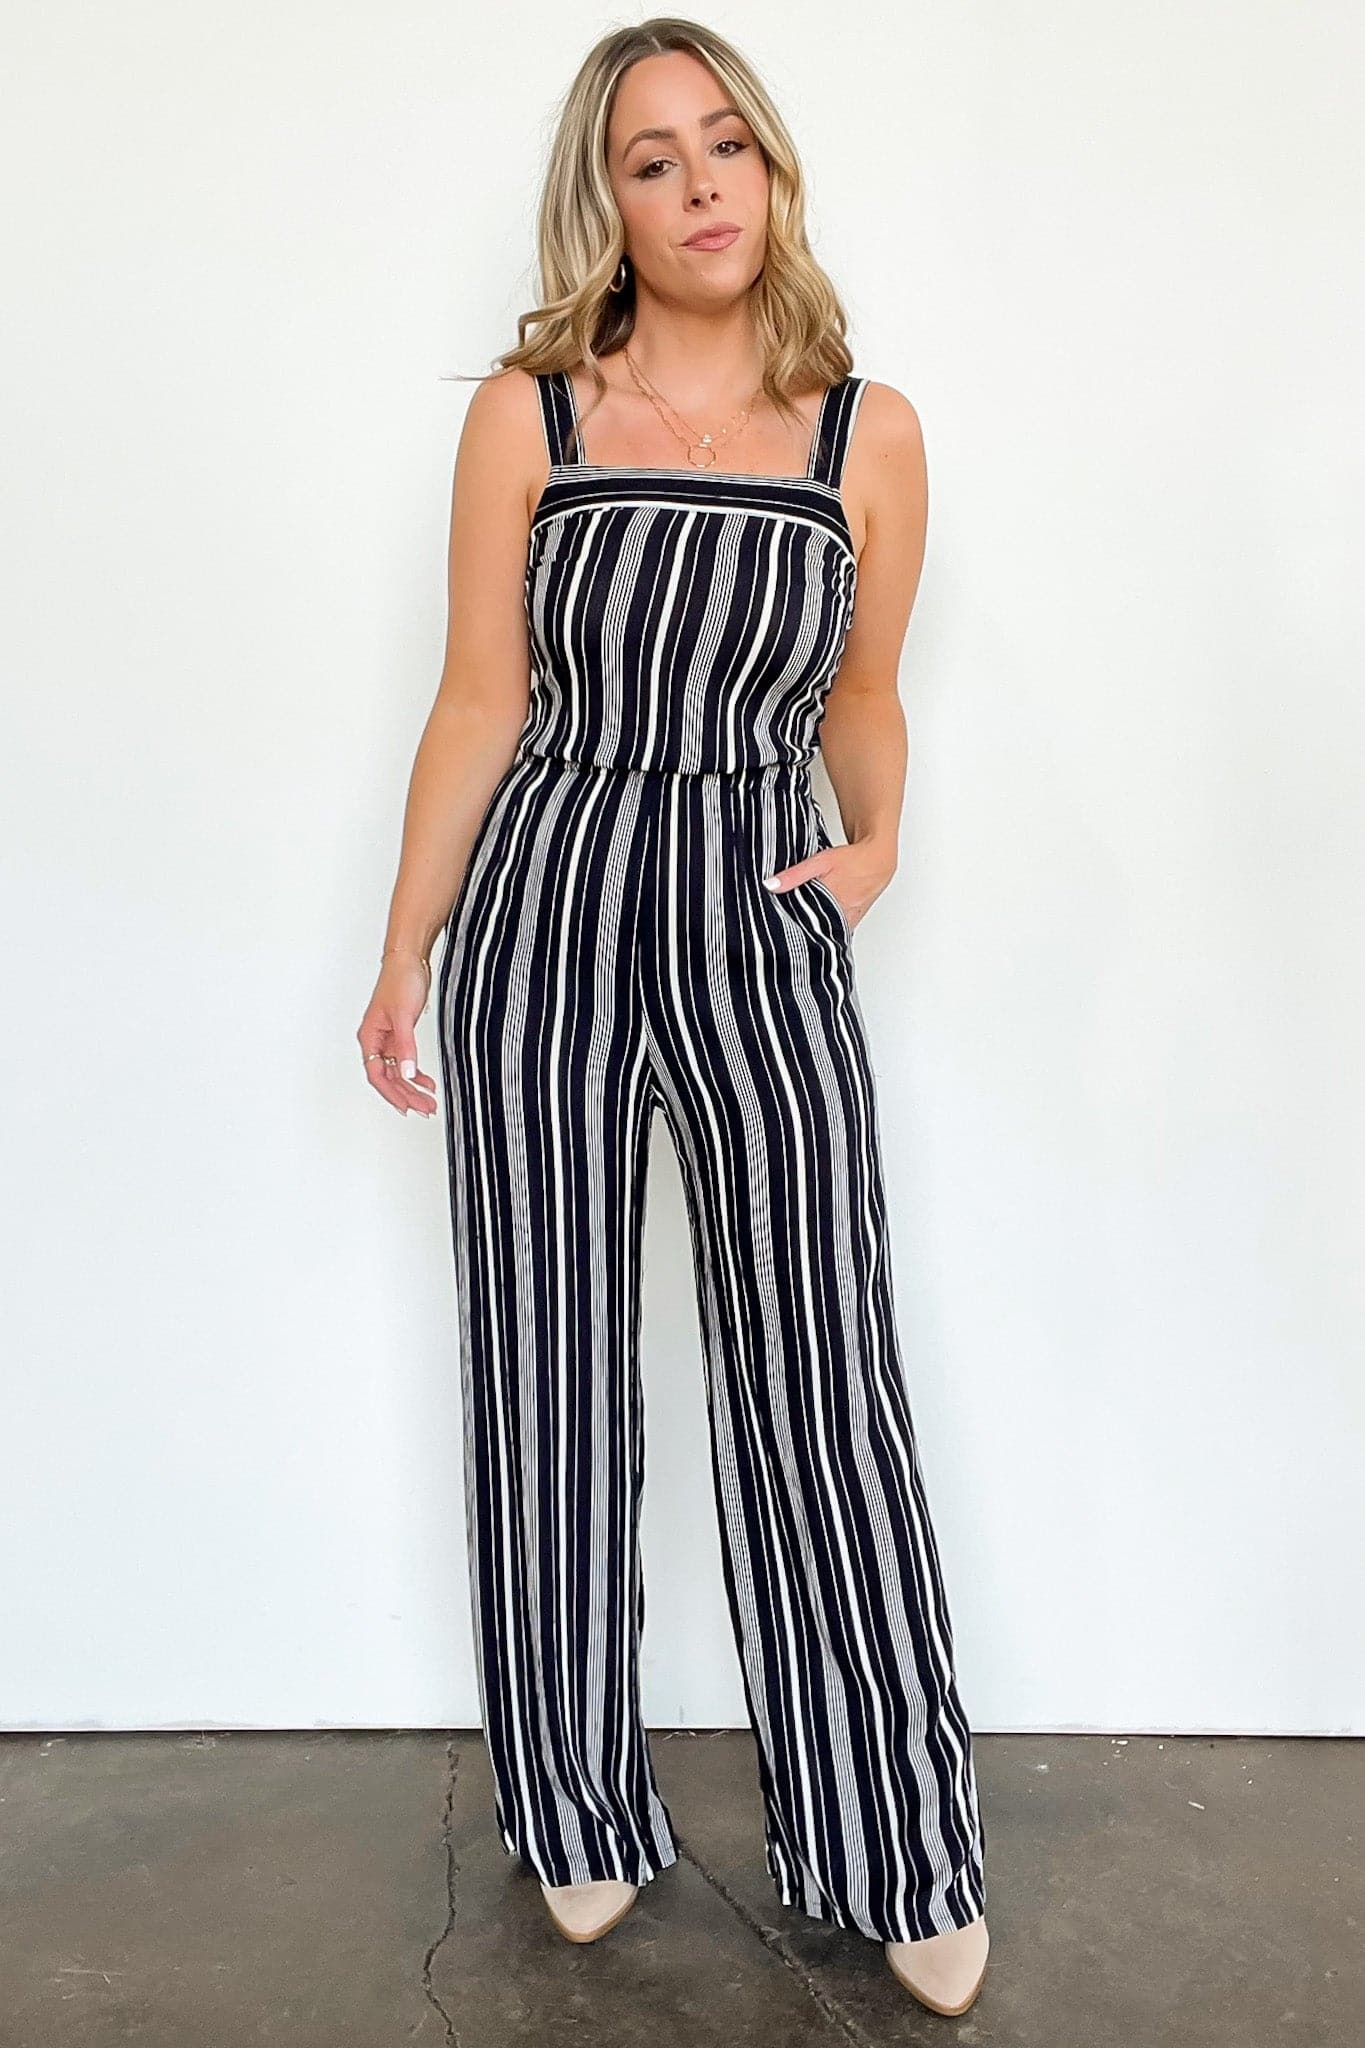  Cambre Striped Tie Back Jumpsuit - FINAL SALE - Madison and Mallory